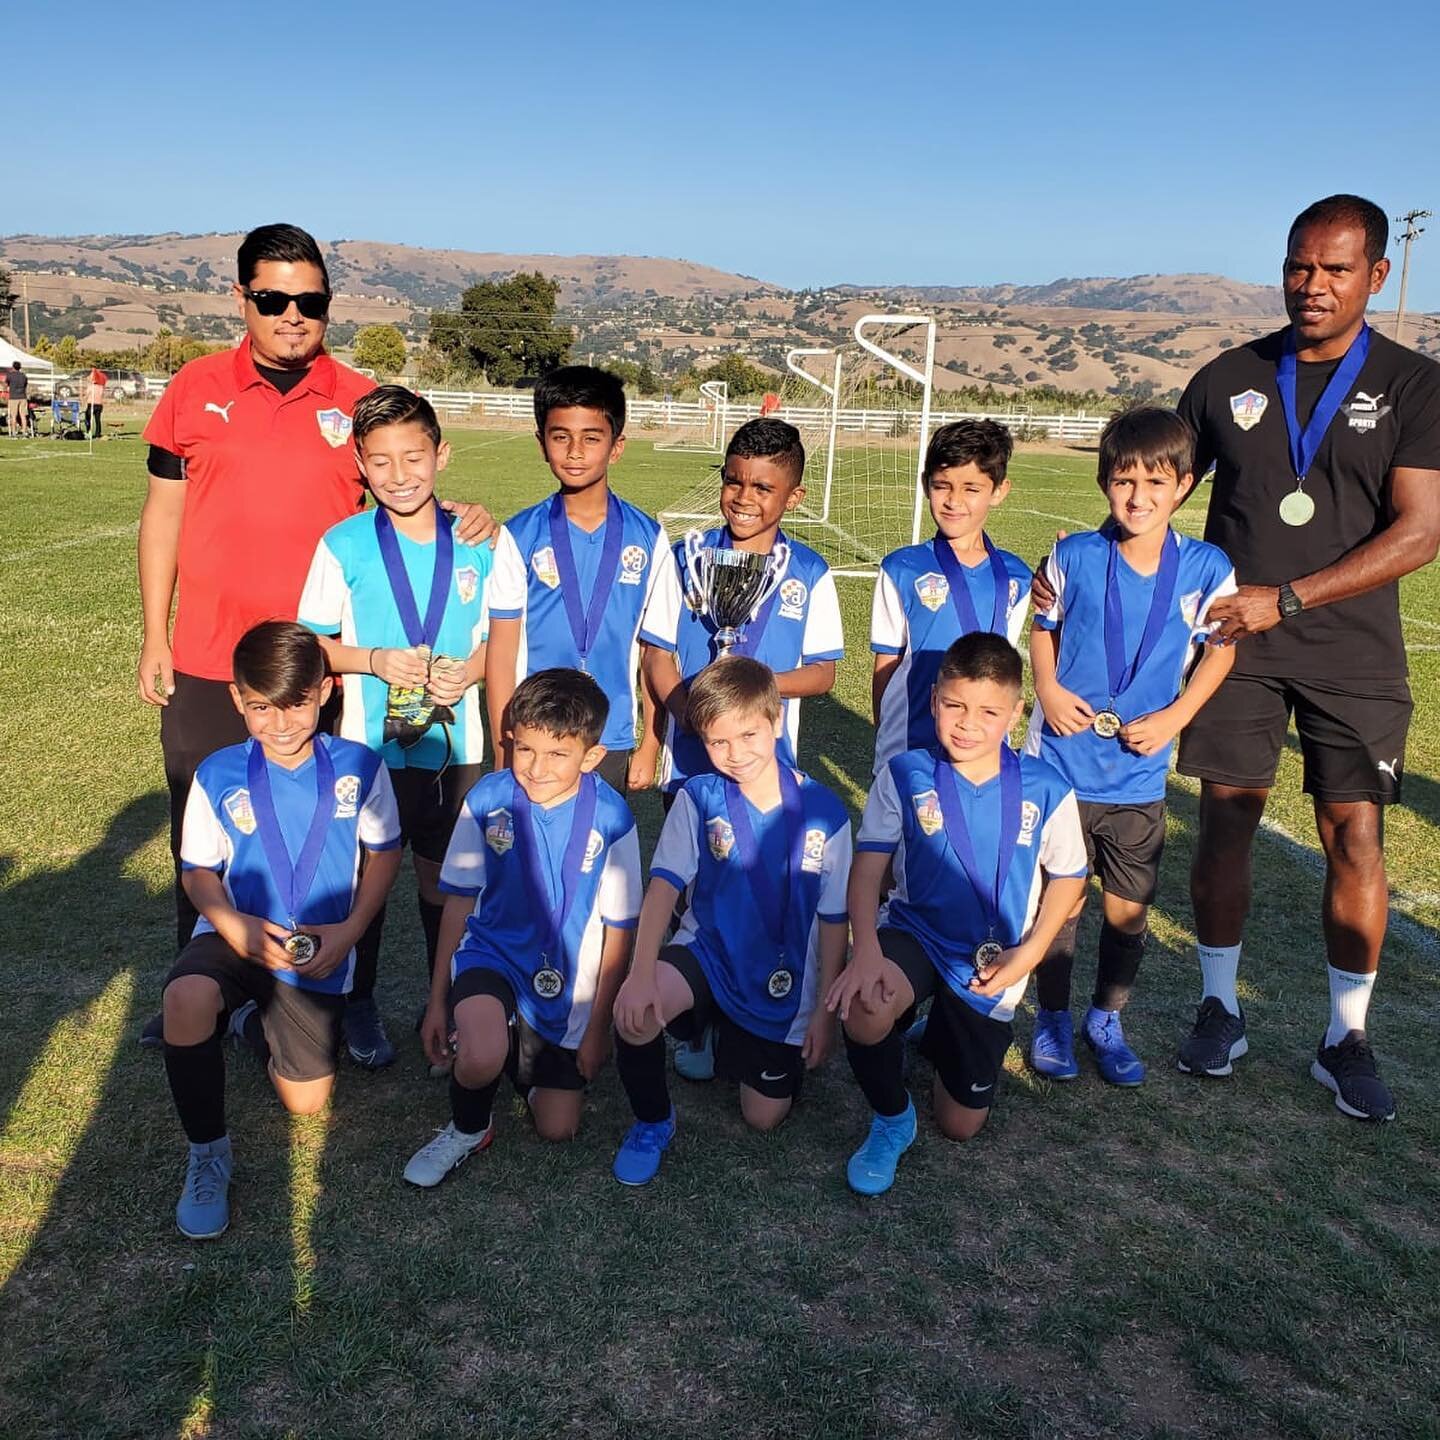 Another championship for our 2011 boys. We are actually trying to play football great job boys lots to improve but we are excited about coaching our players ⚽️🇺🇸